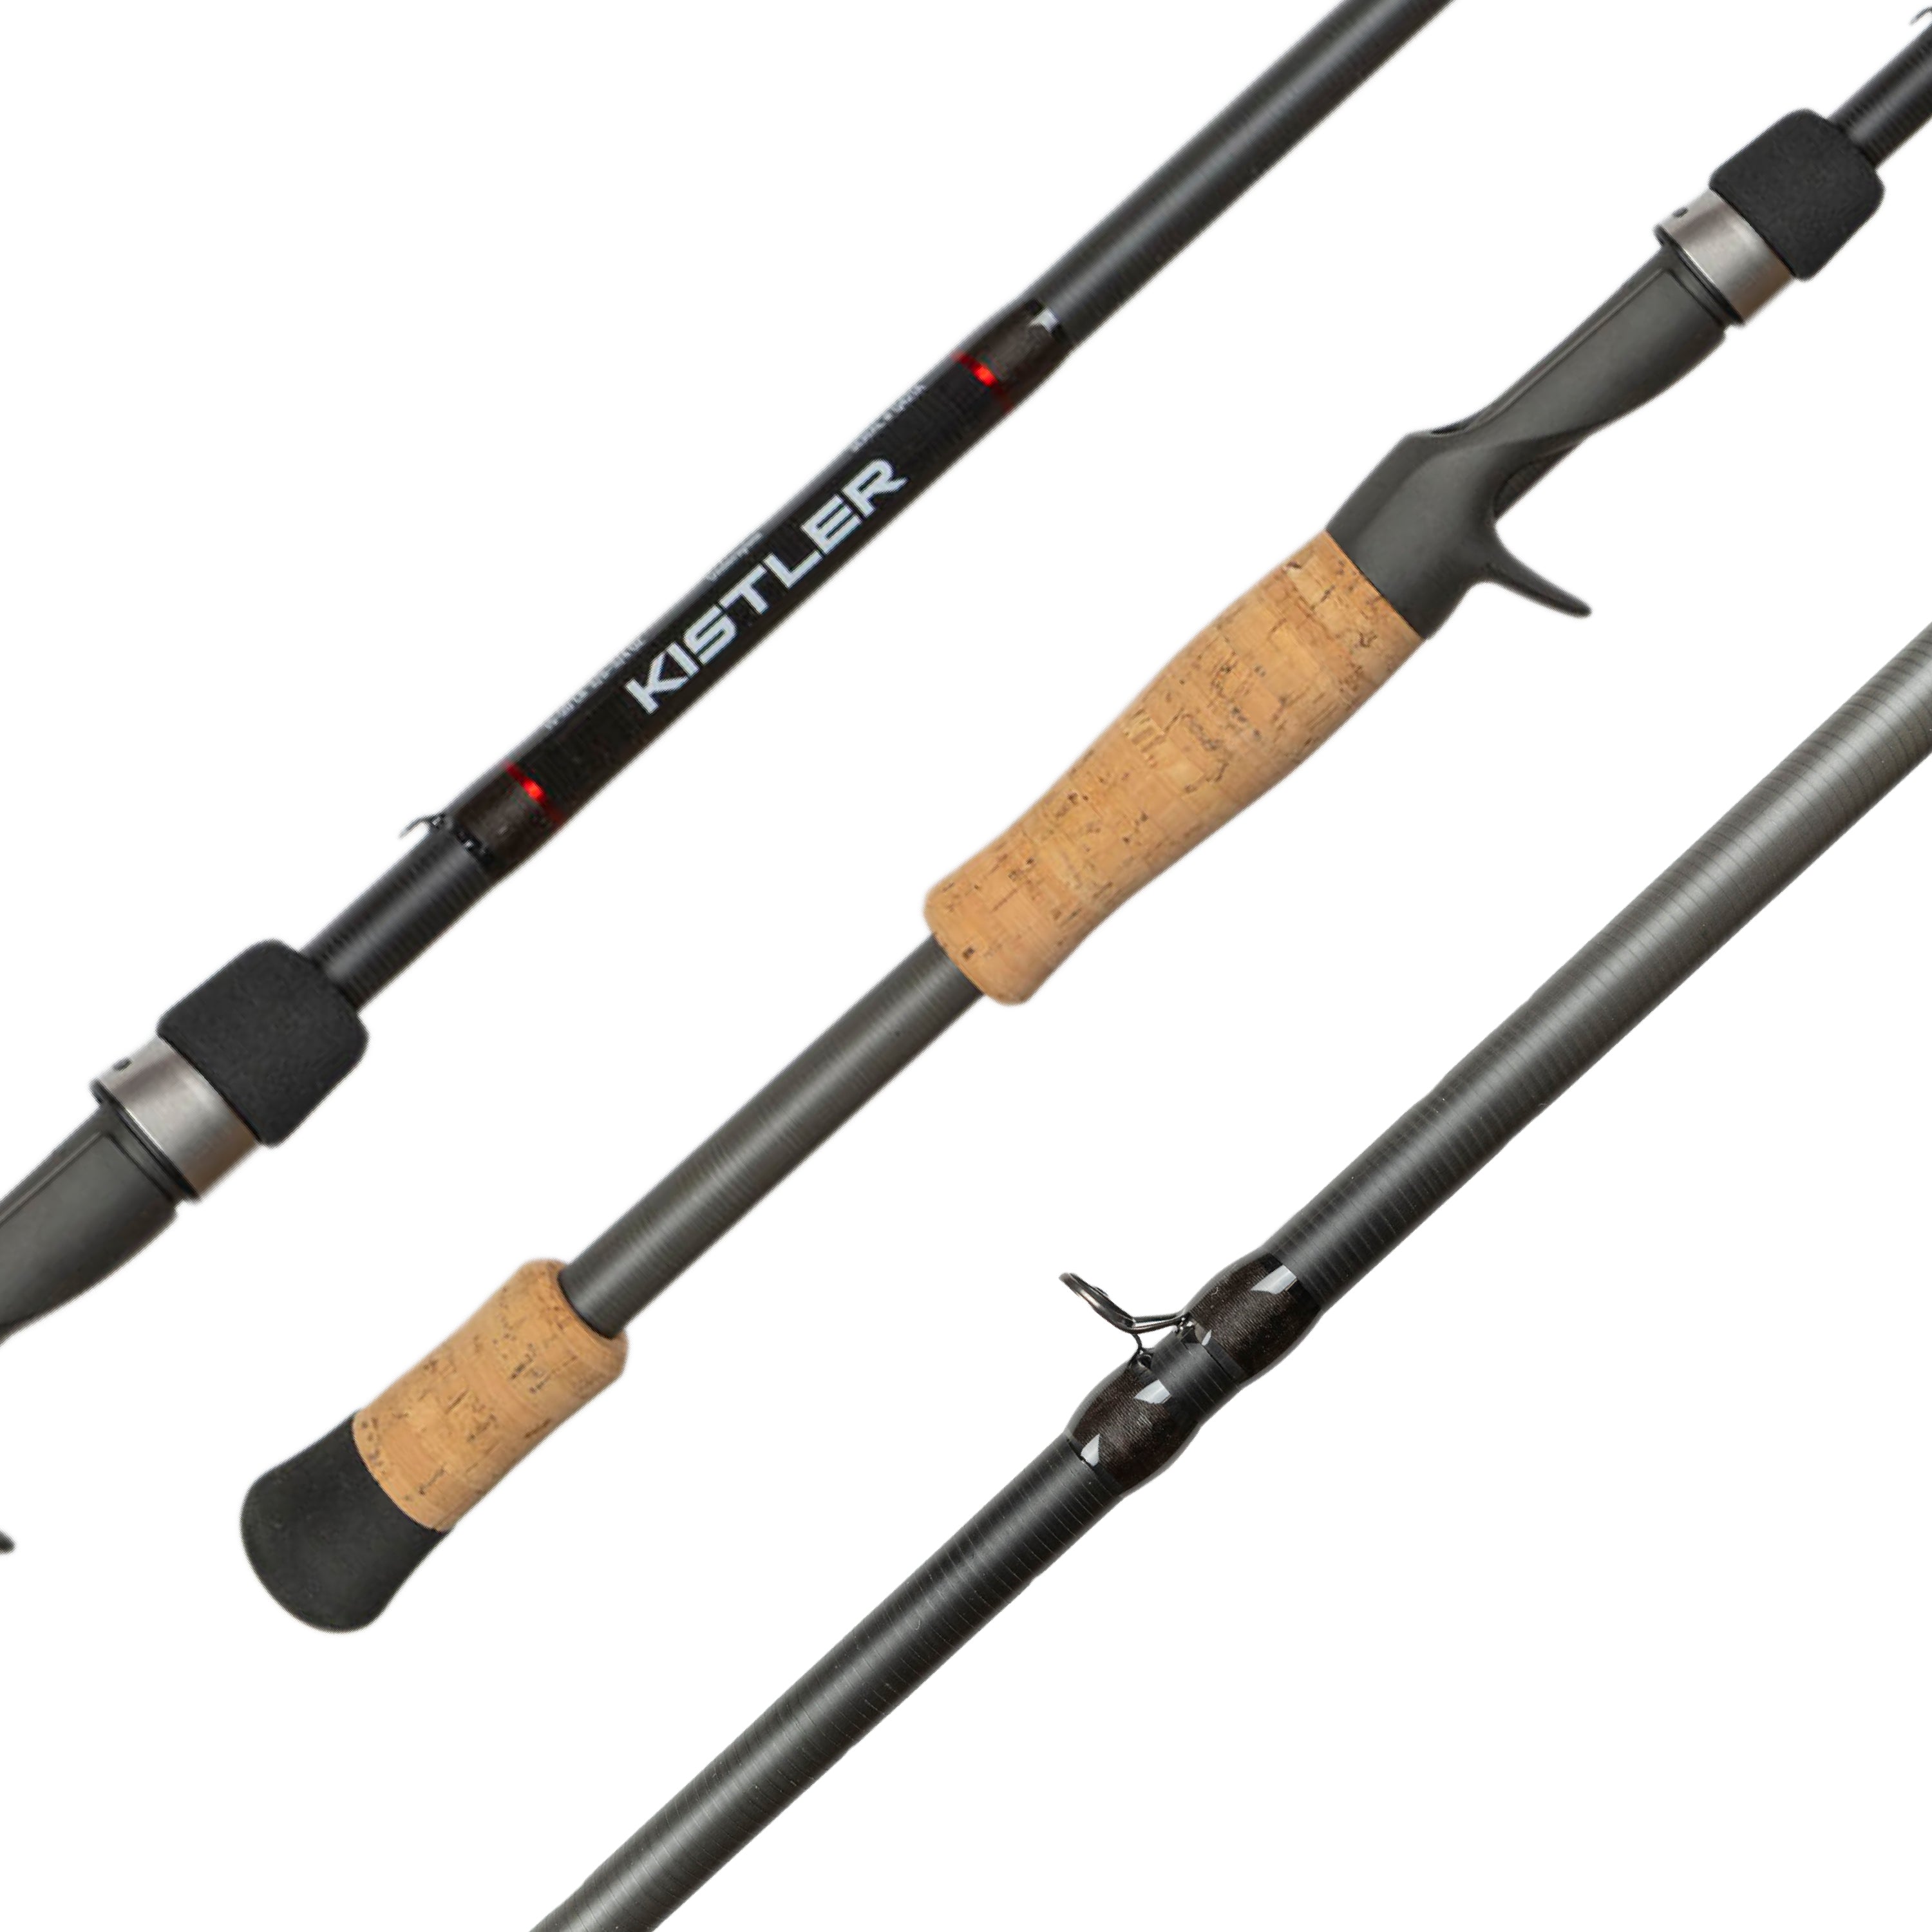 Fishing Rods for sale in Hurst, Texas